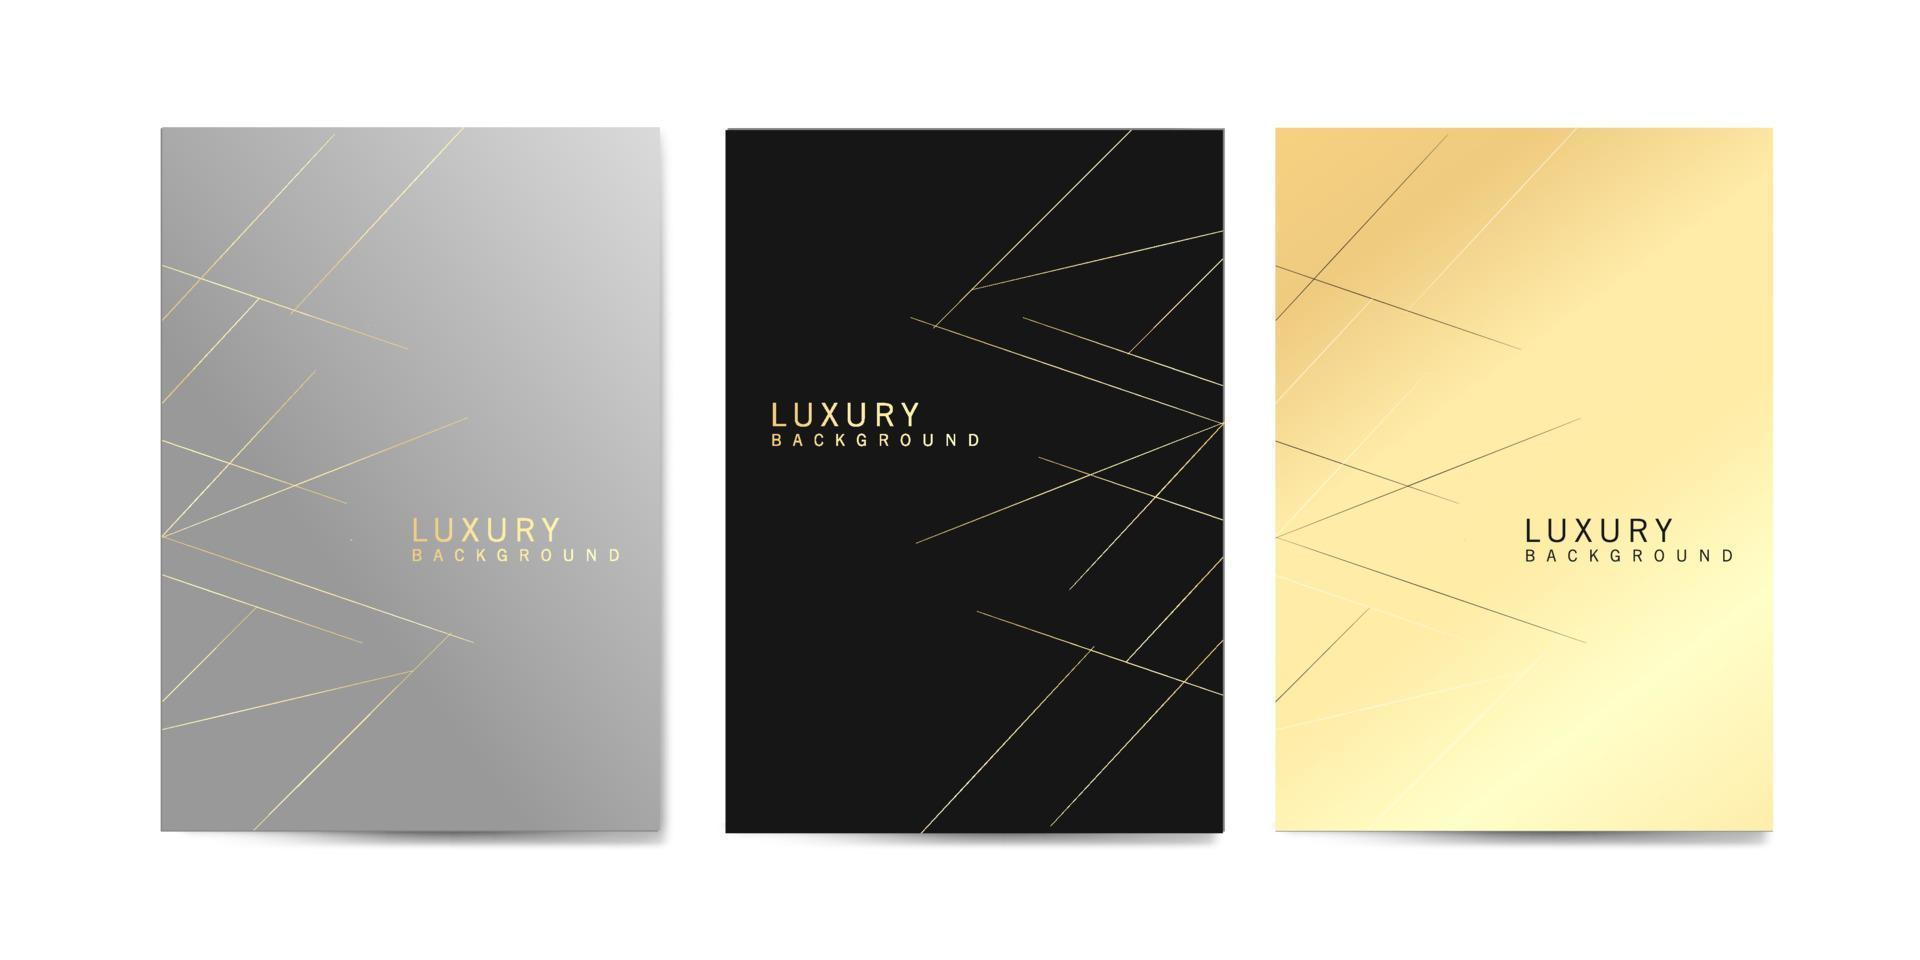 Luxury Covers with minimal design. black and gold backgrounds for your design. Applicable for Banners, Placards, Posters, Flyers etc. Eps10 vector